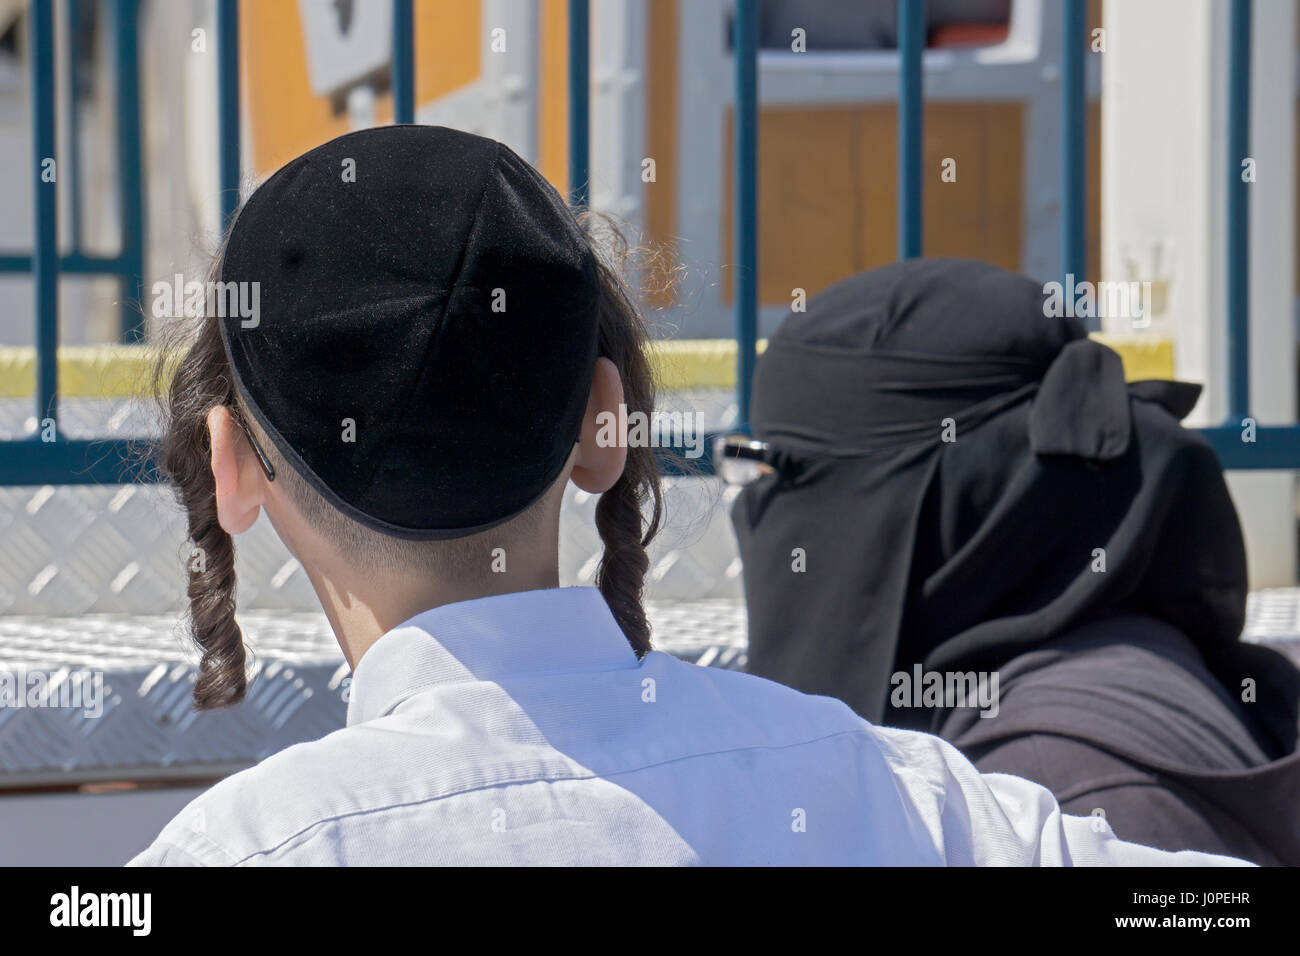 An orthodox religious Jewish boy standing next to a Muslim woman in a hijab at Luna Park in Coney Island, Brooklyn, New York City Stock Photo